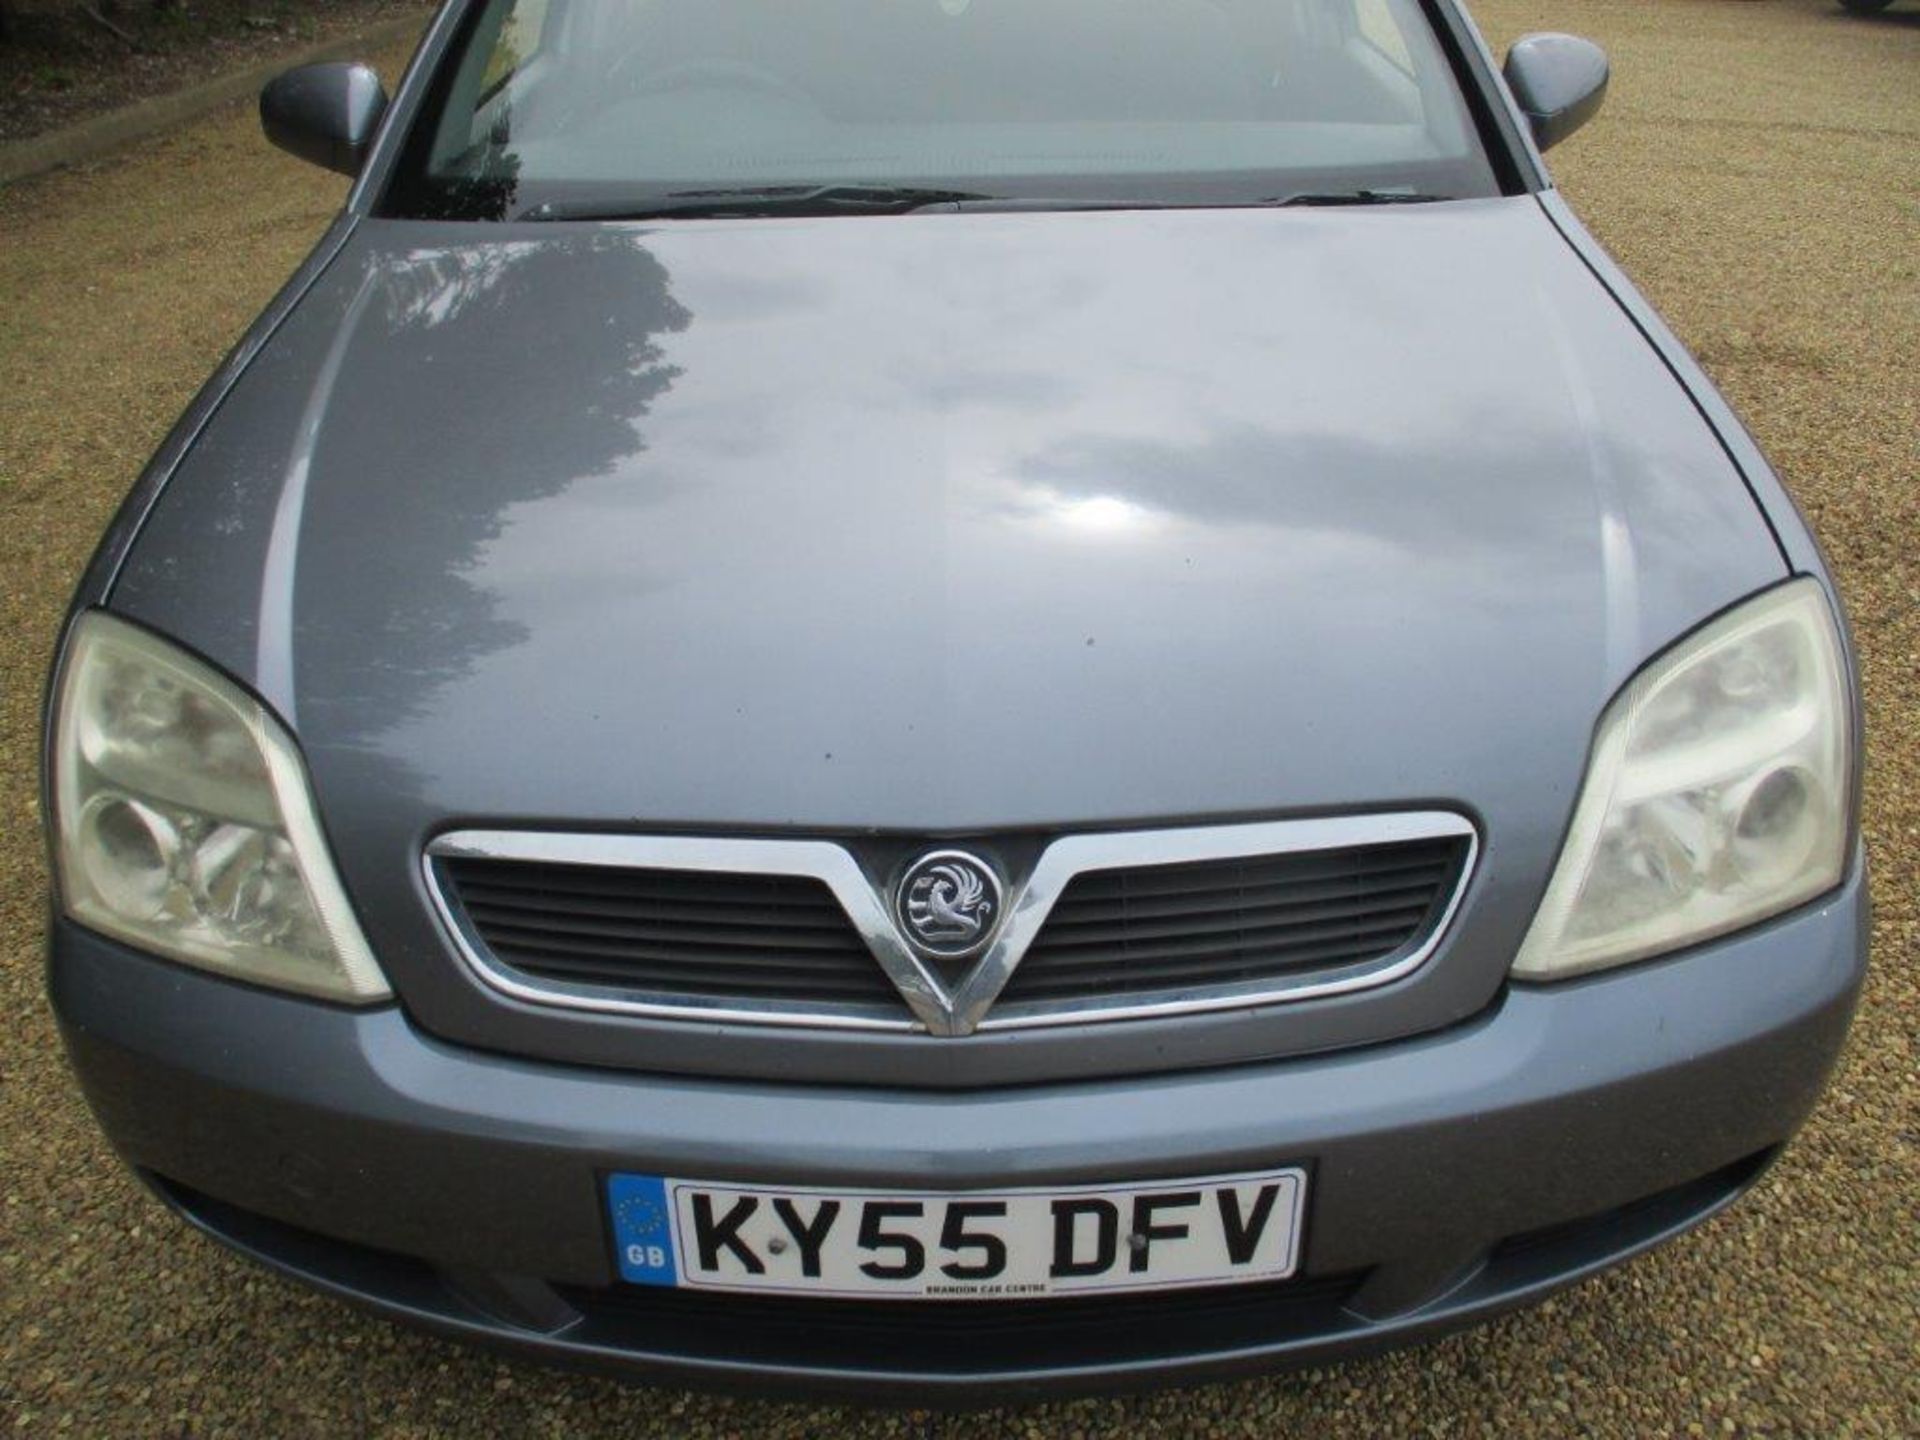 05 55 Vauxhall Vectra Life 5DR - Image 7 of 17